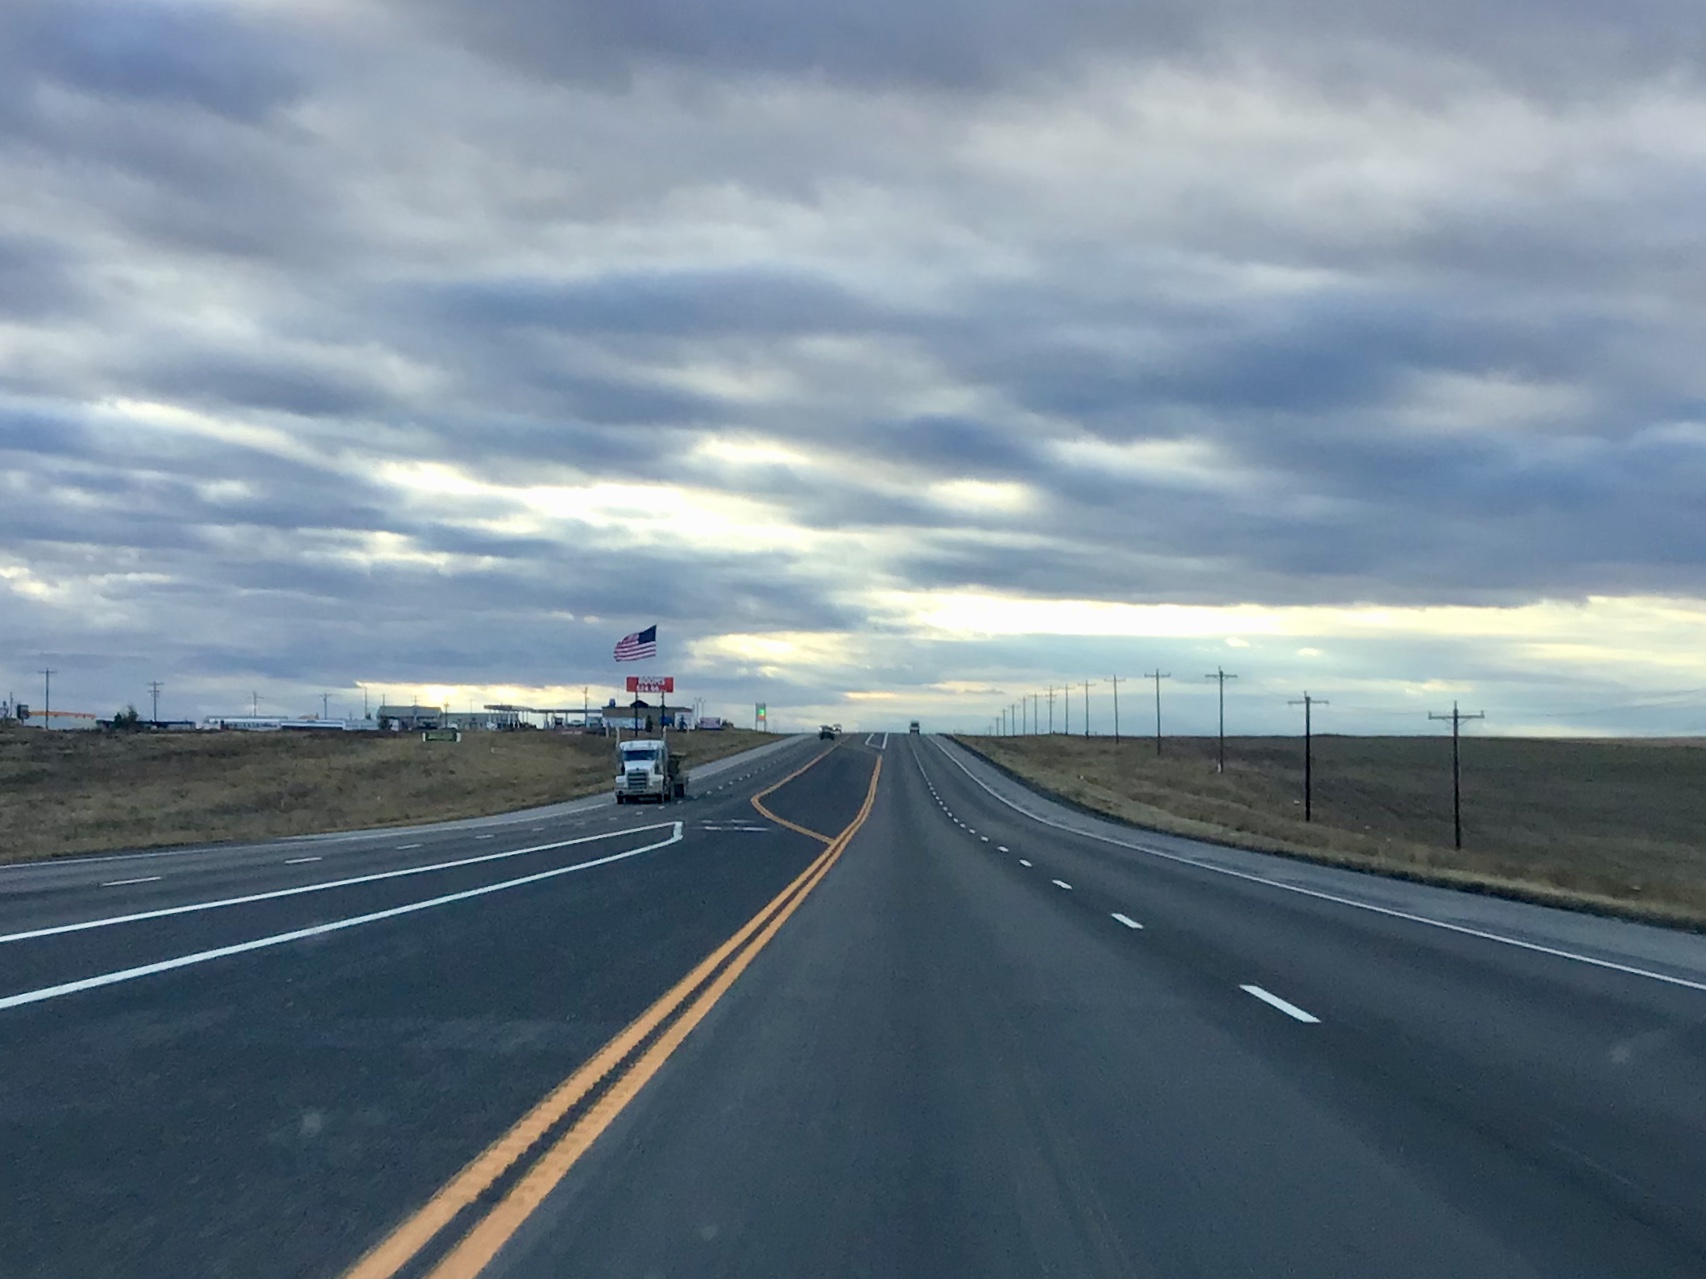  During the height of the boom, Highway 85 between Williston and Watford City was called North Dakota’s “most dangerous road.” The NDDOT upgraded the road from a two-lane to a four-lane highway with a turning lane to address the increases in truck tr